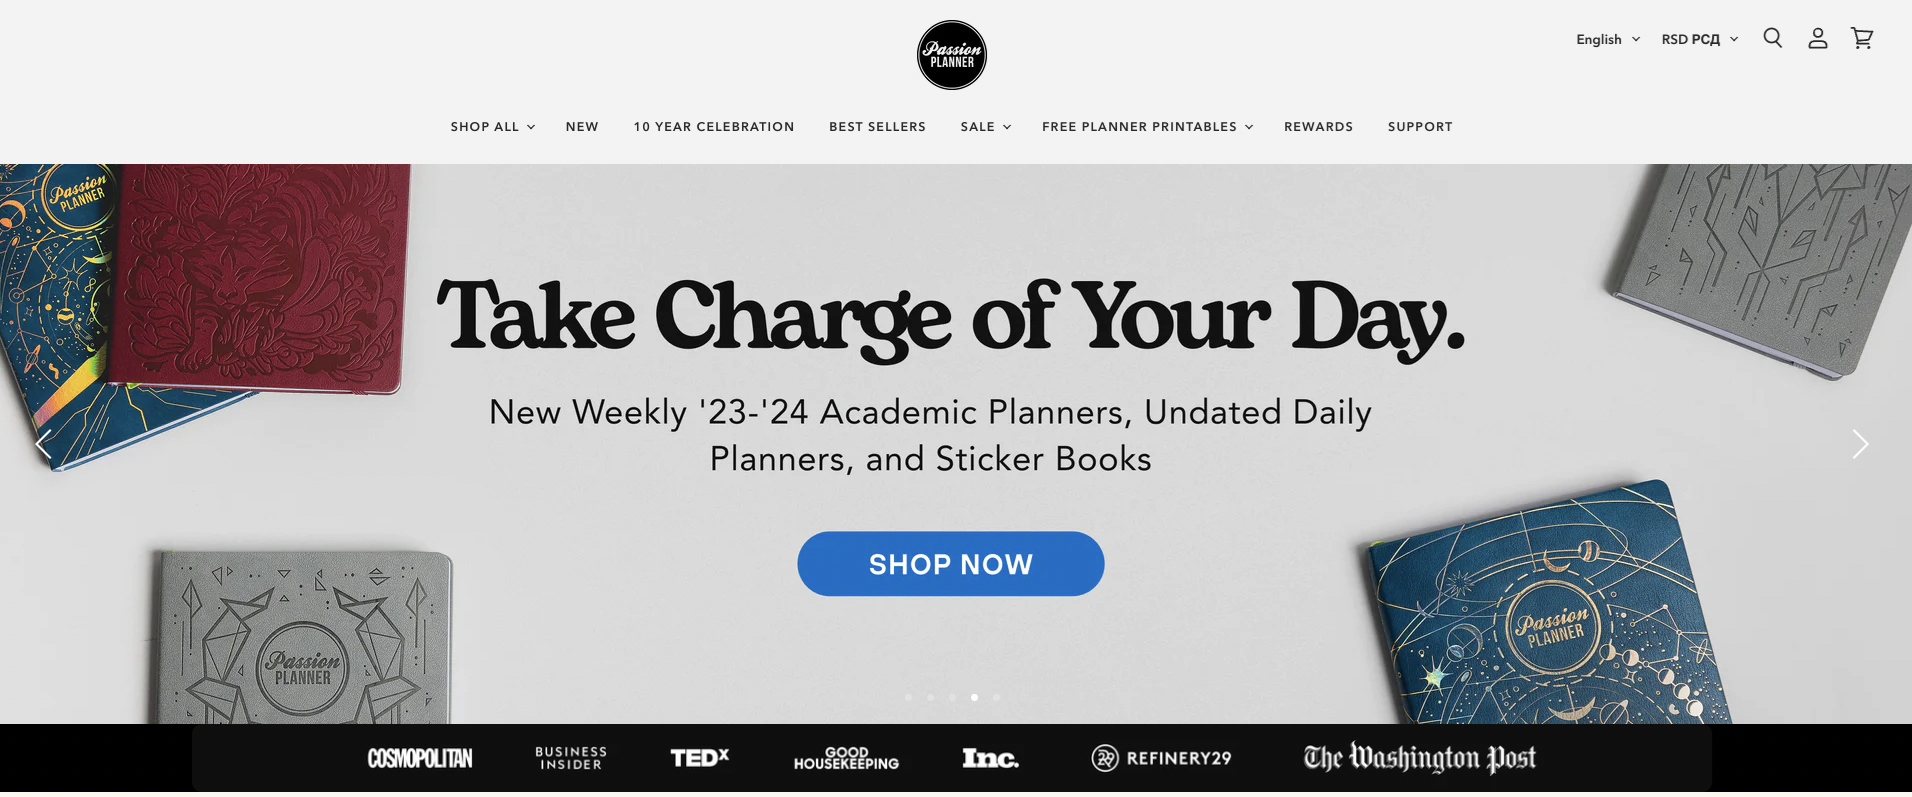 Passion Planner ecommerce landing page example